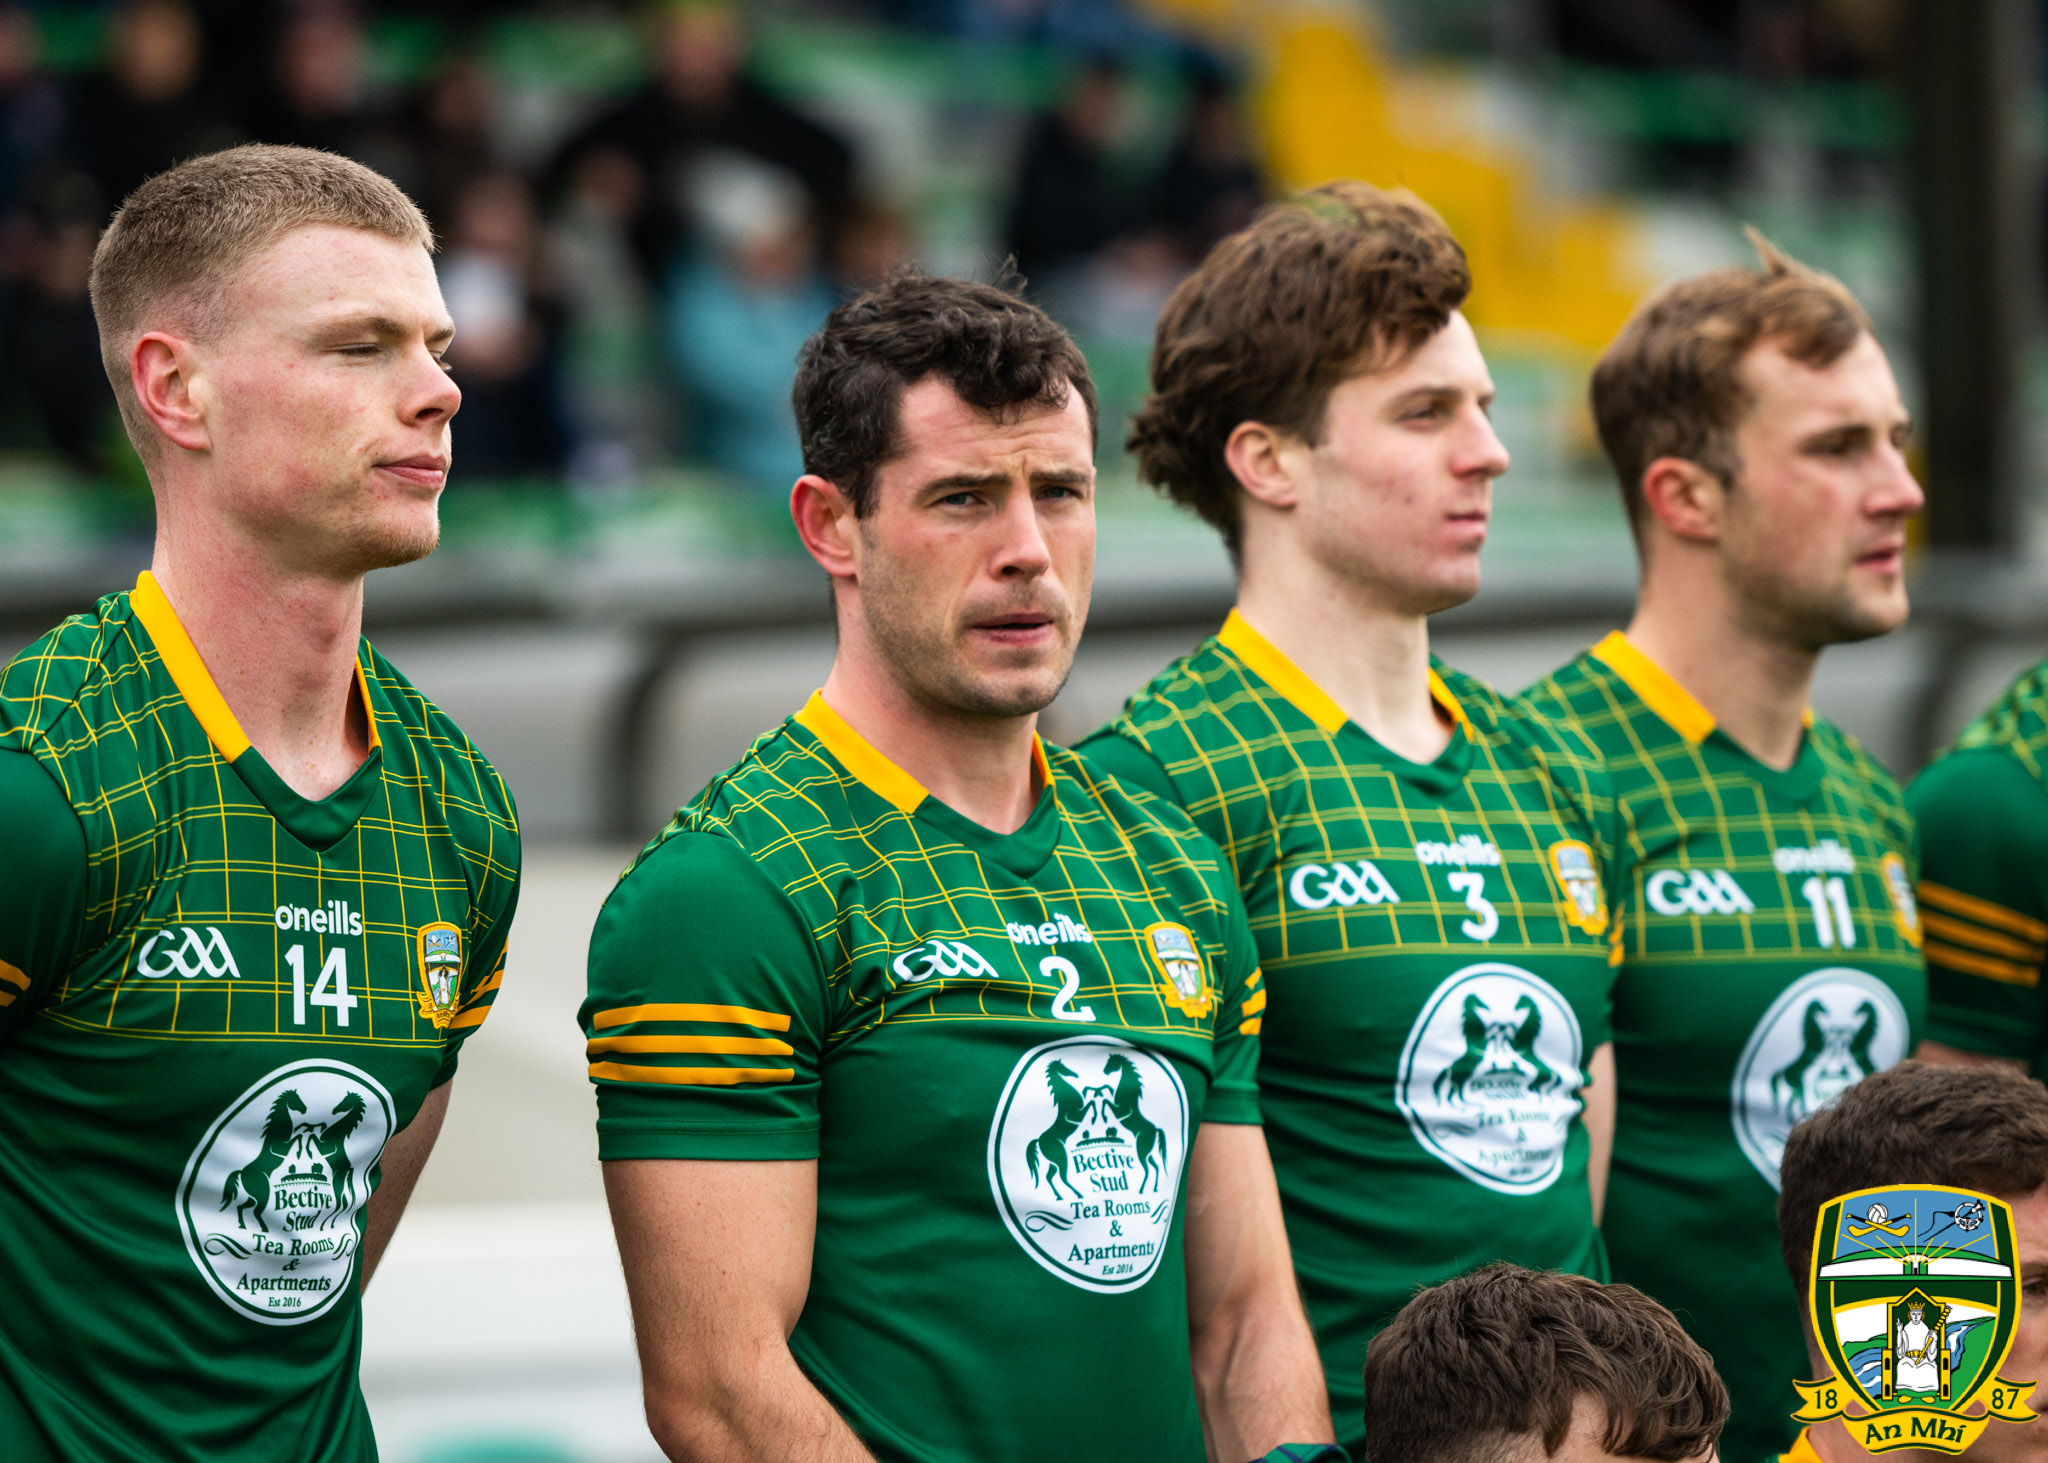 Meath shuffle the deck ahead of Louth encounter